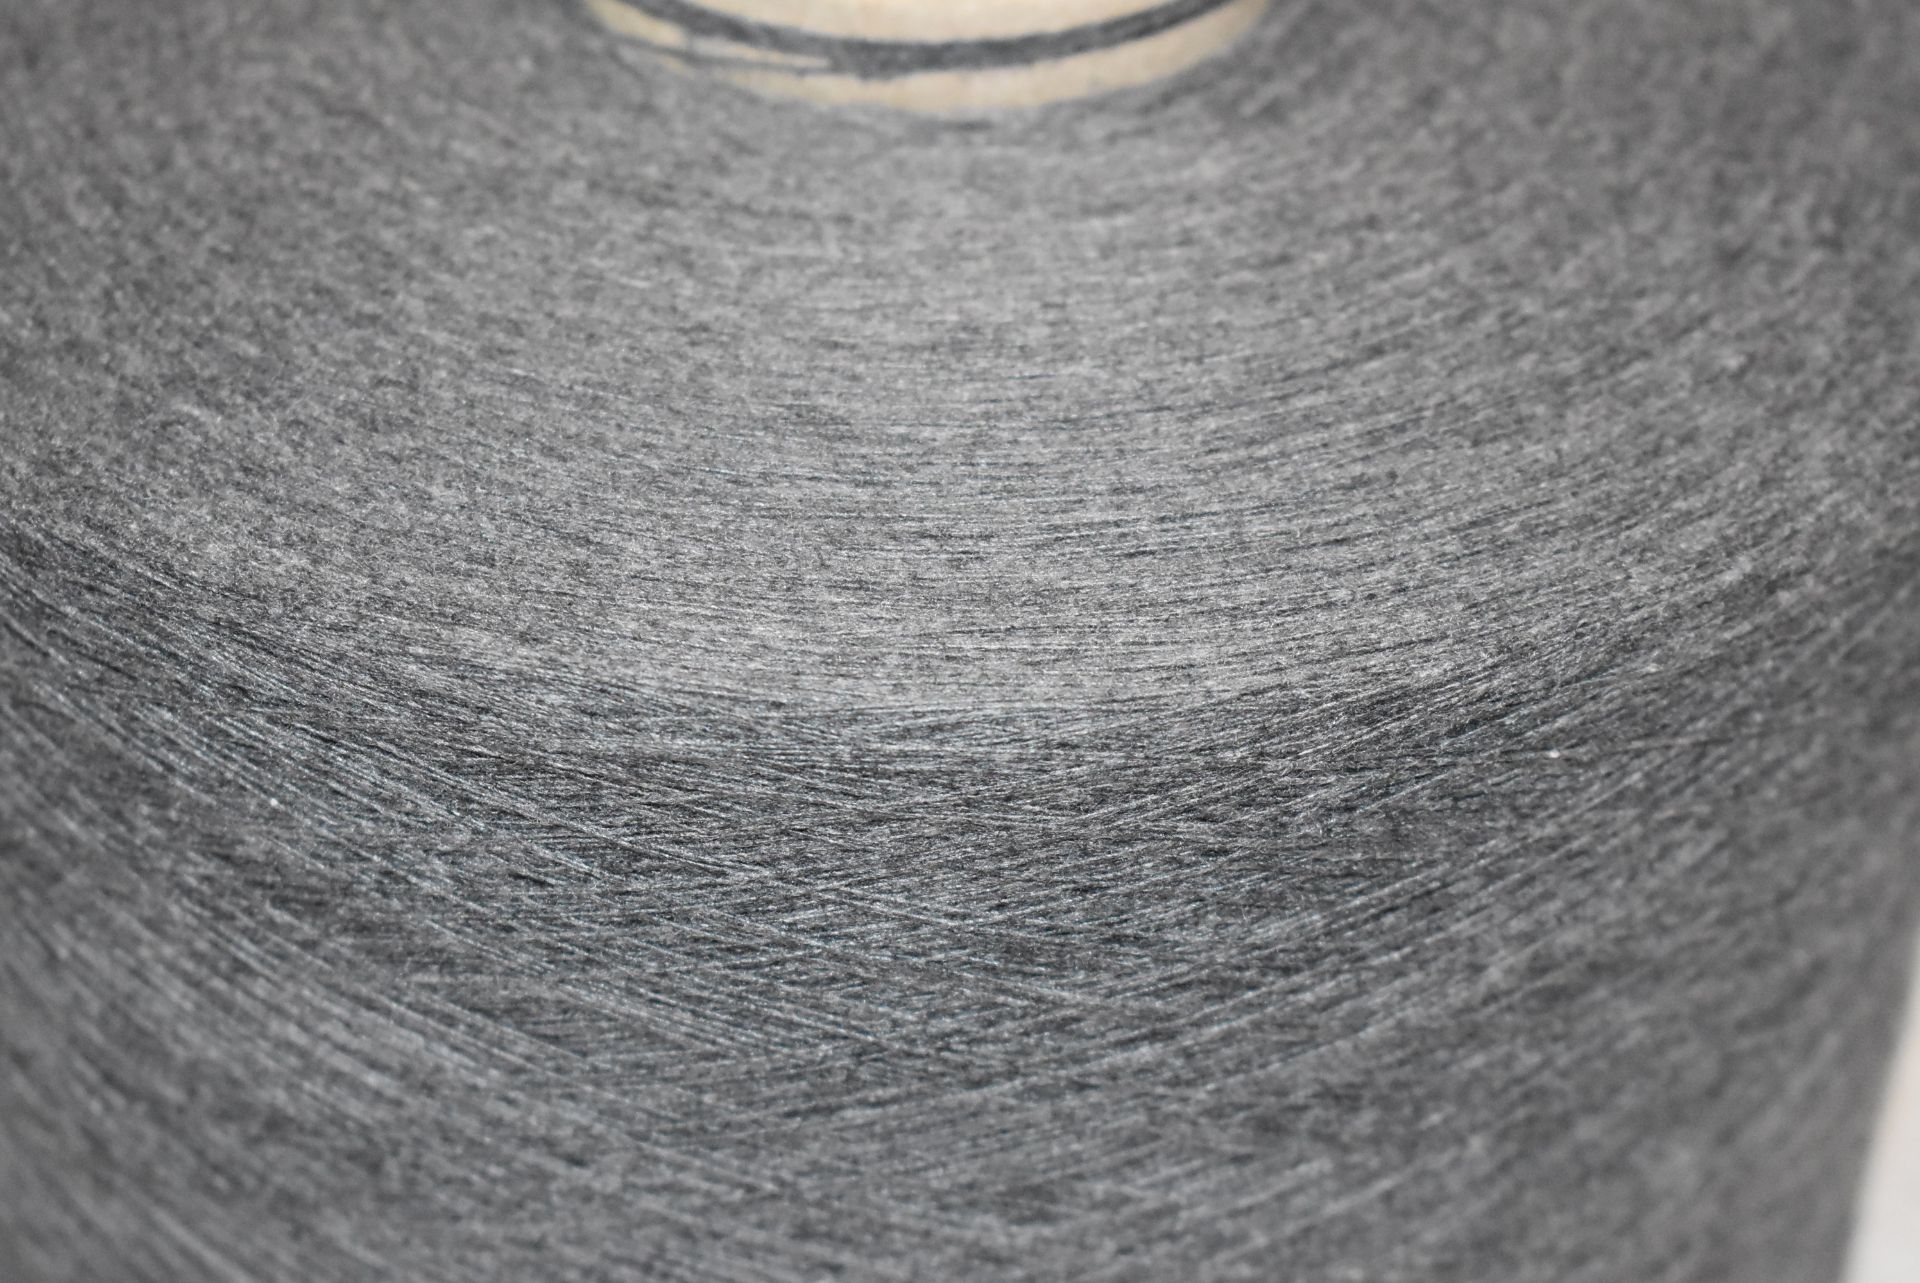 1 x Cone of 1/13 MicroCotton Knitting Yarn - Mid Grey - Approx Weight: 2,500g - New Stock ABL Yarn - Image 6 of 18